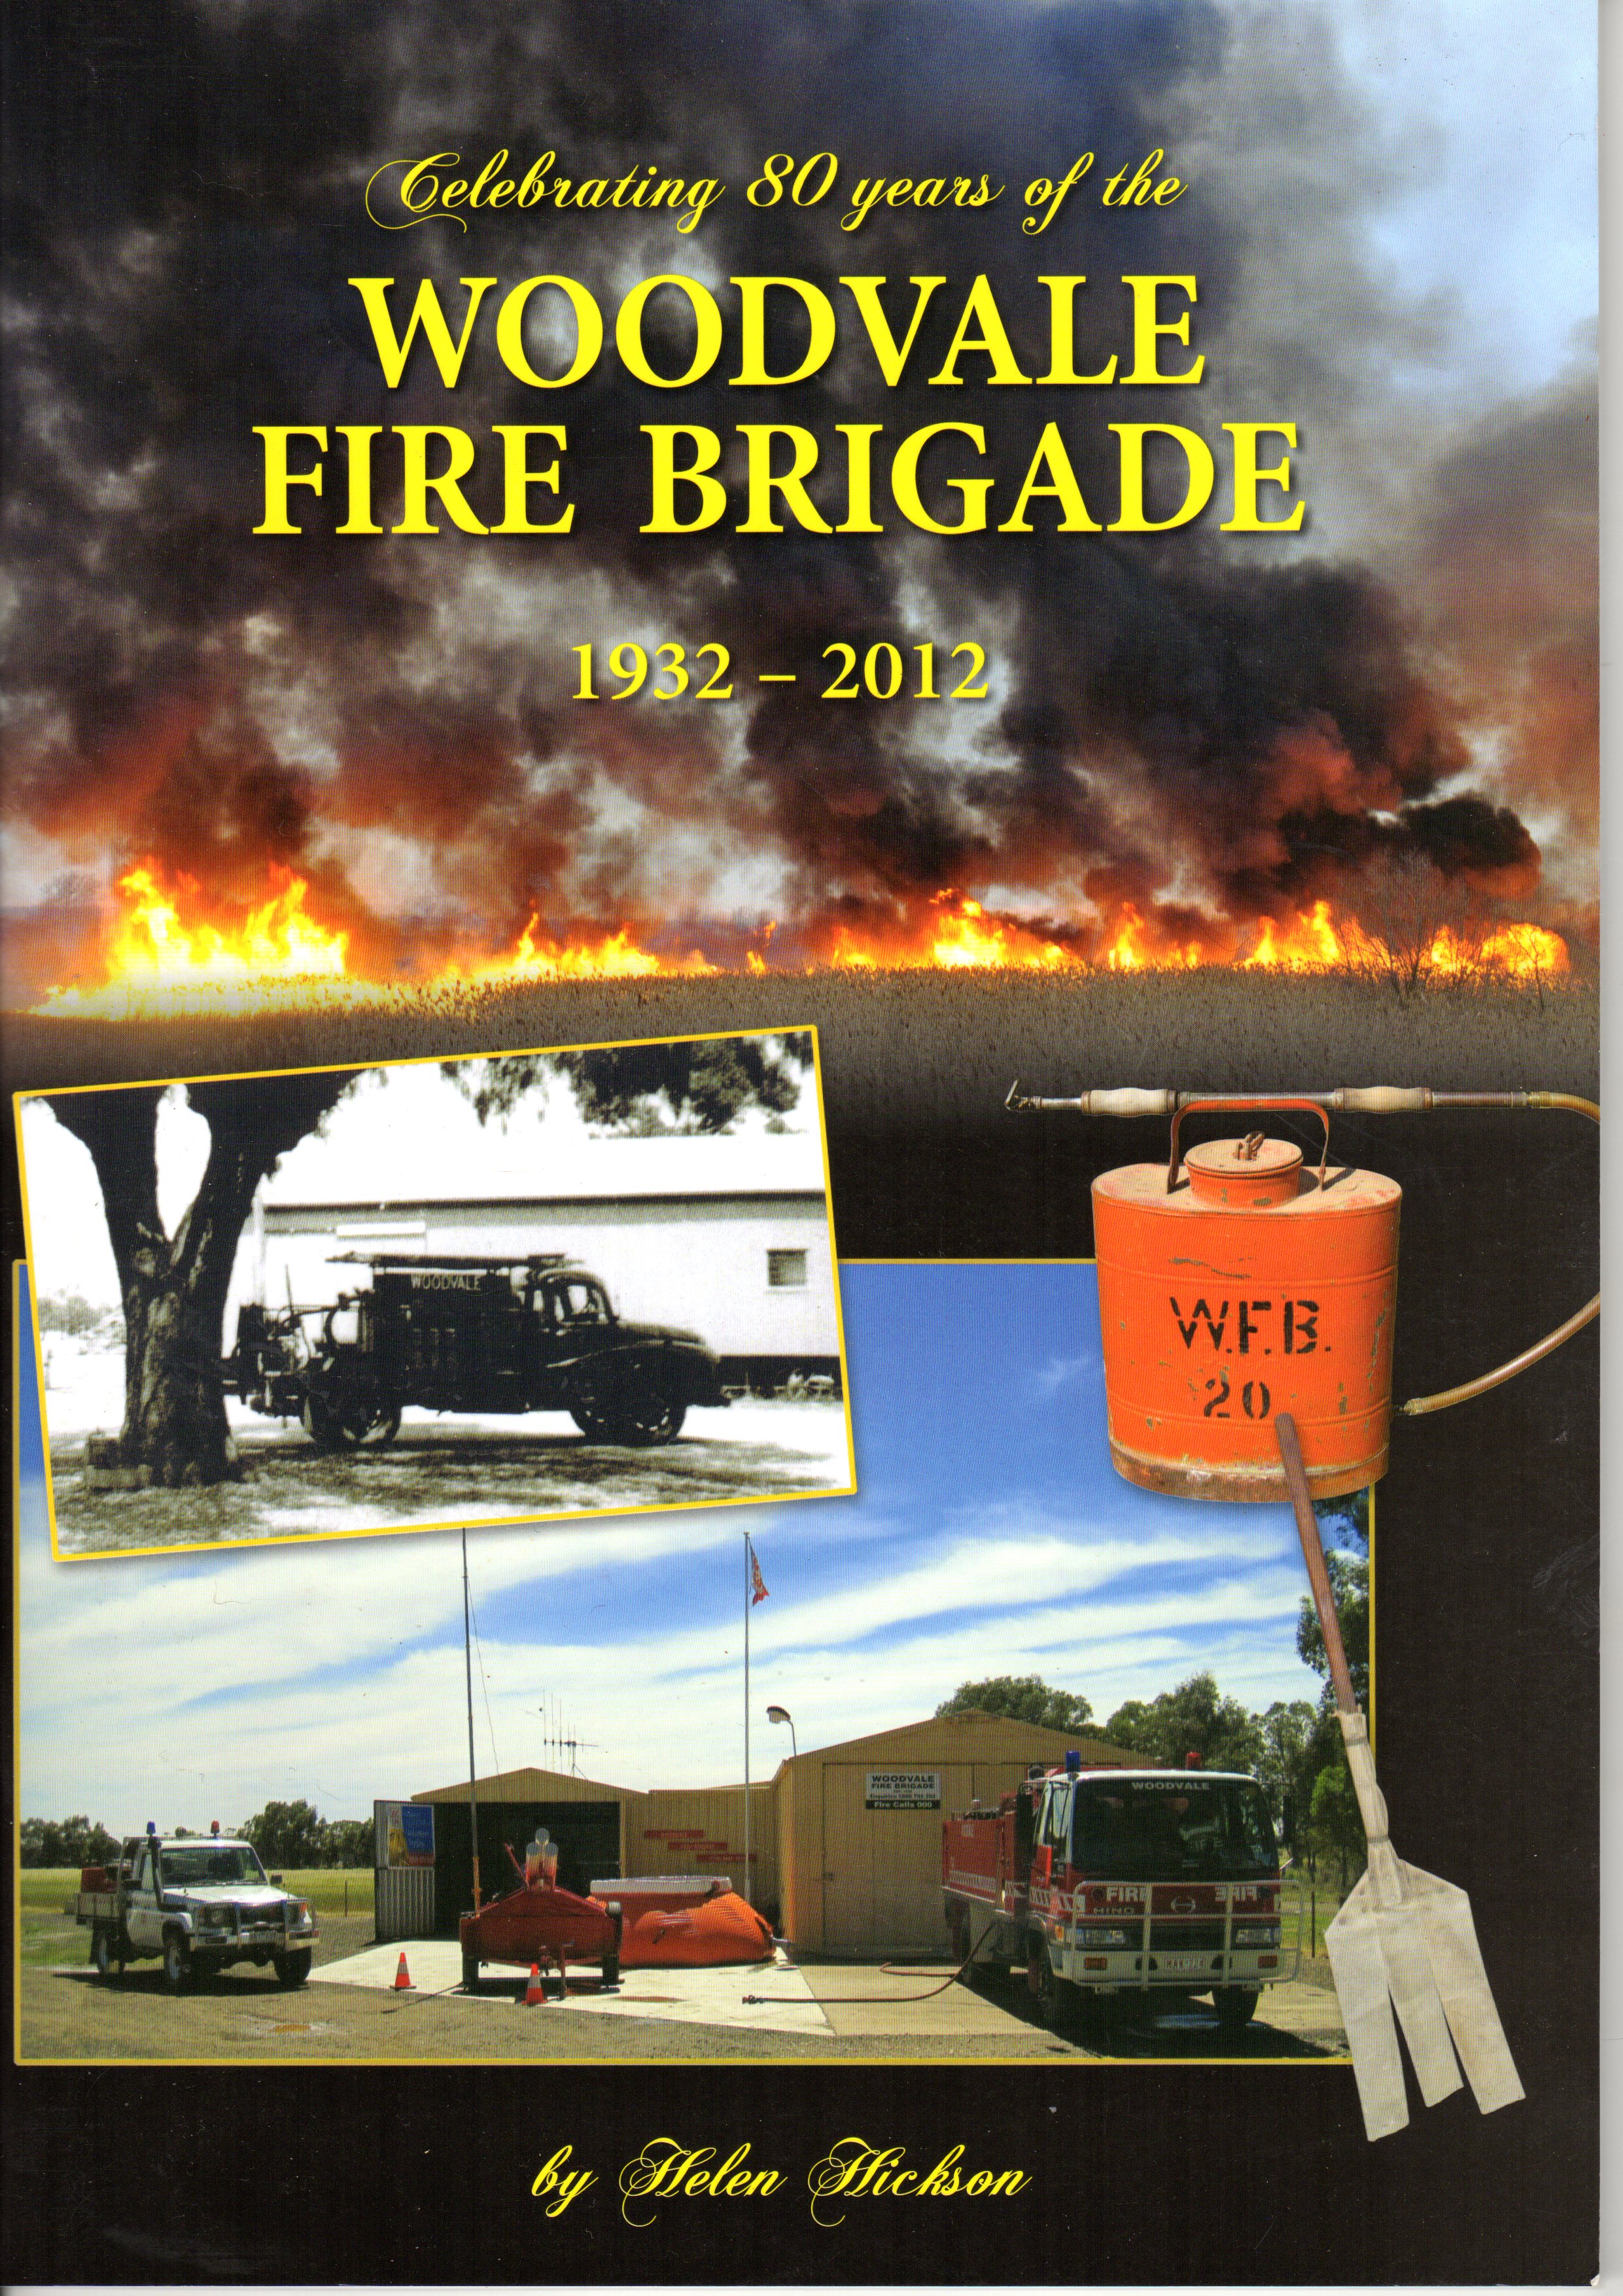 80 Year History of the Woodvale Fire Brigade...